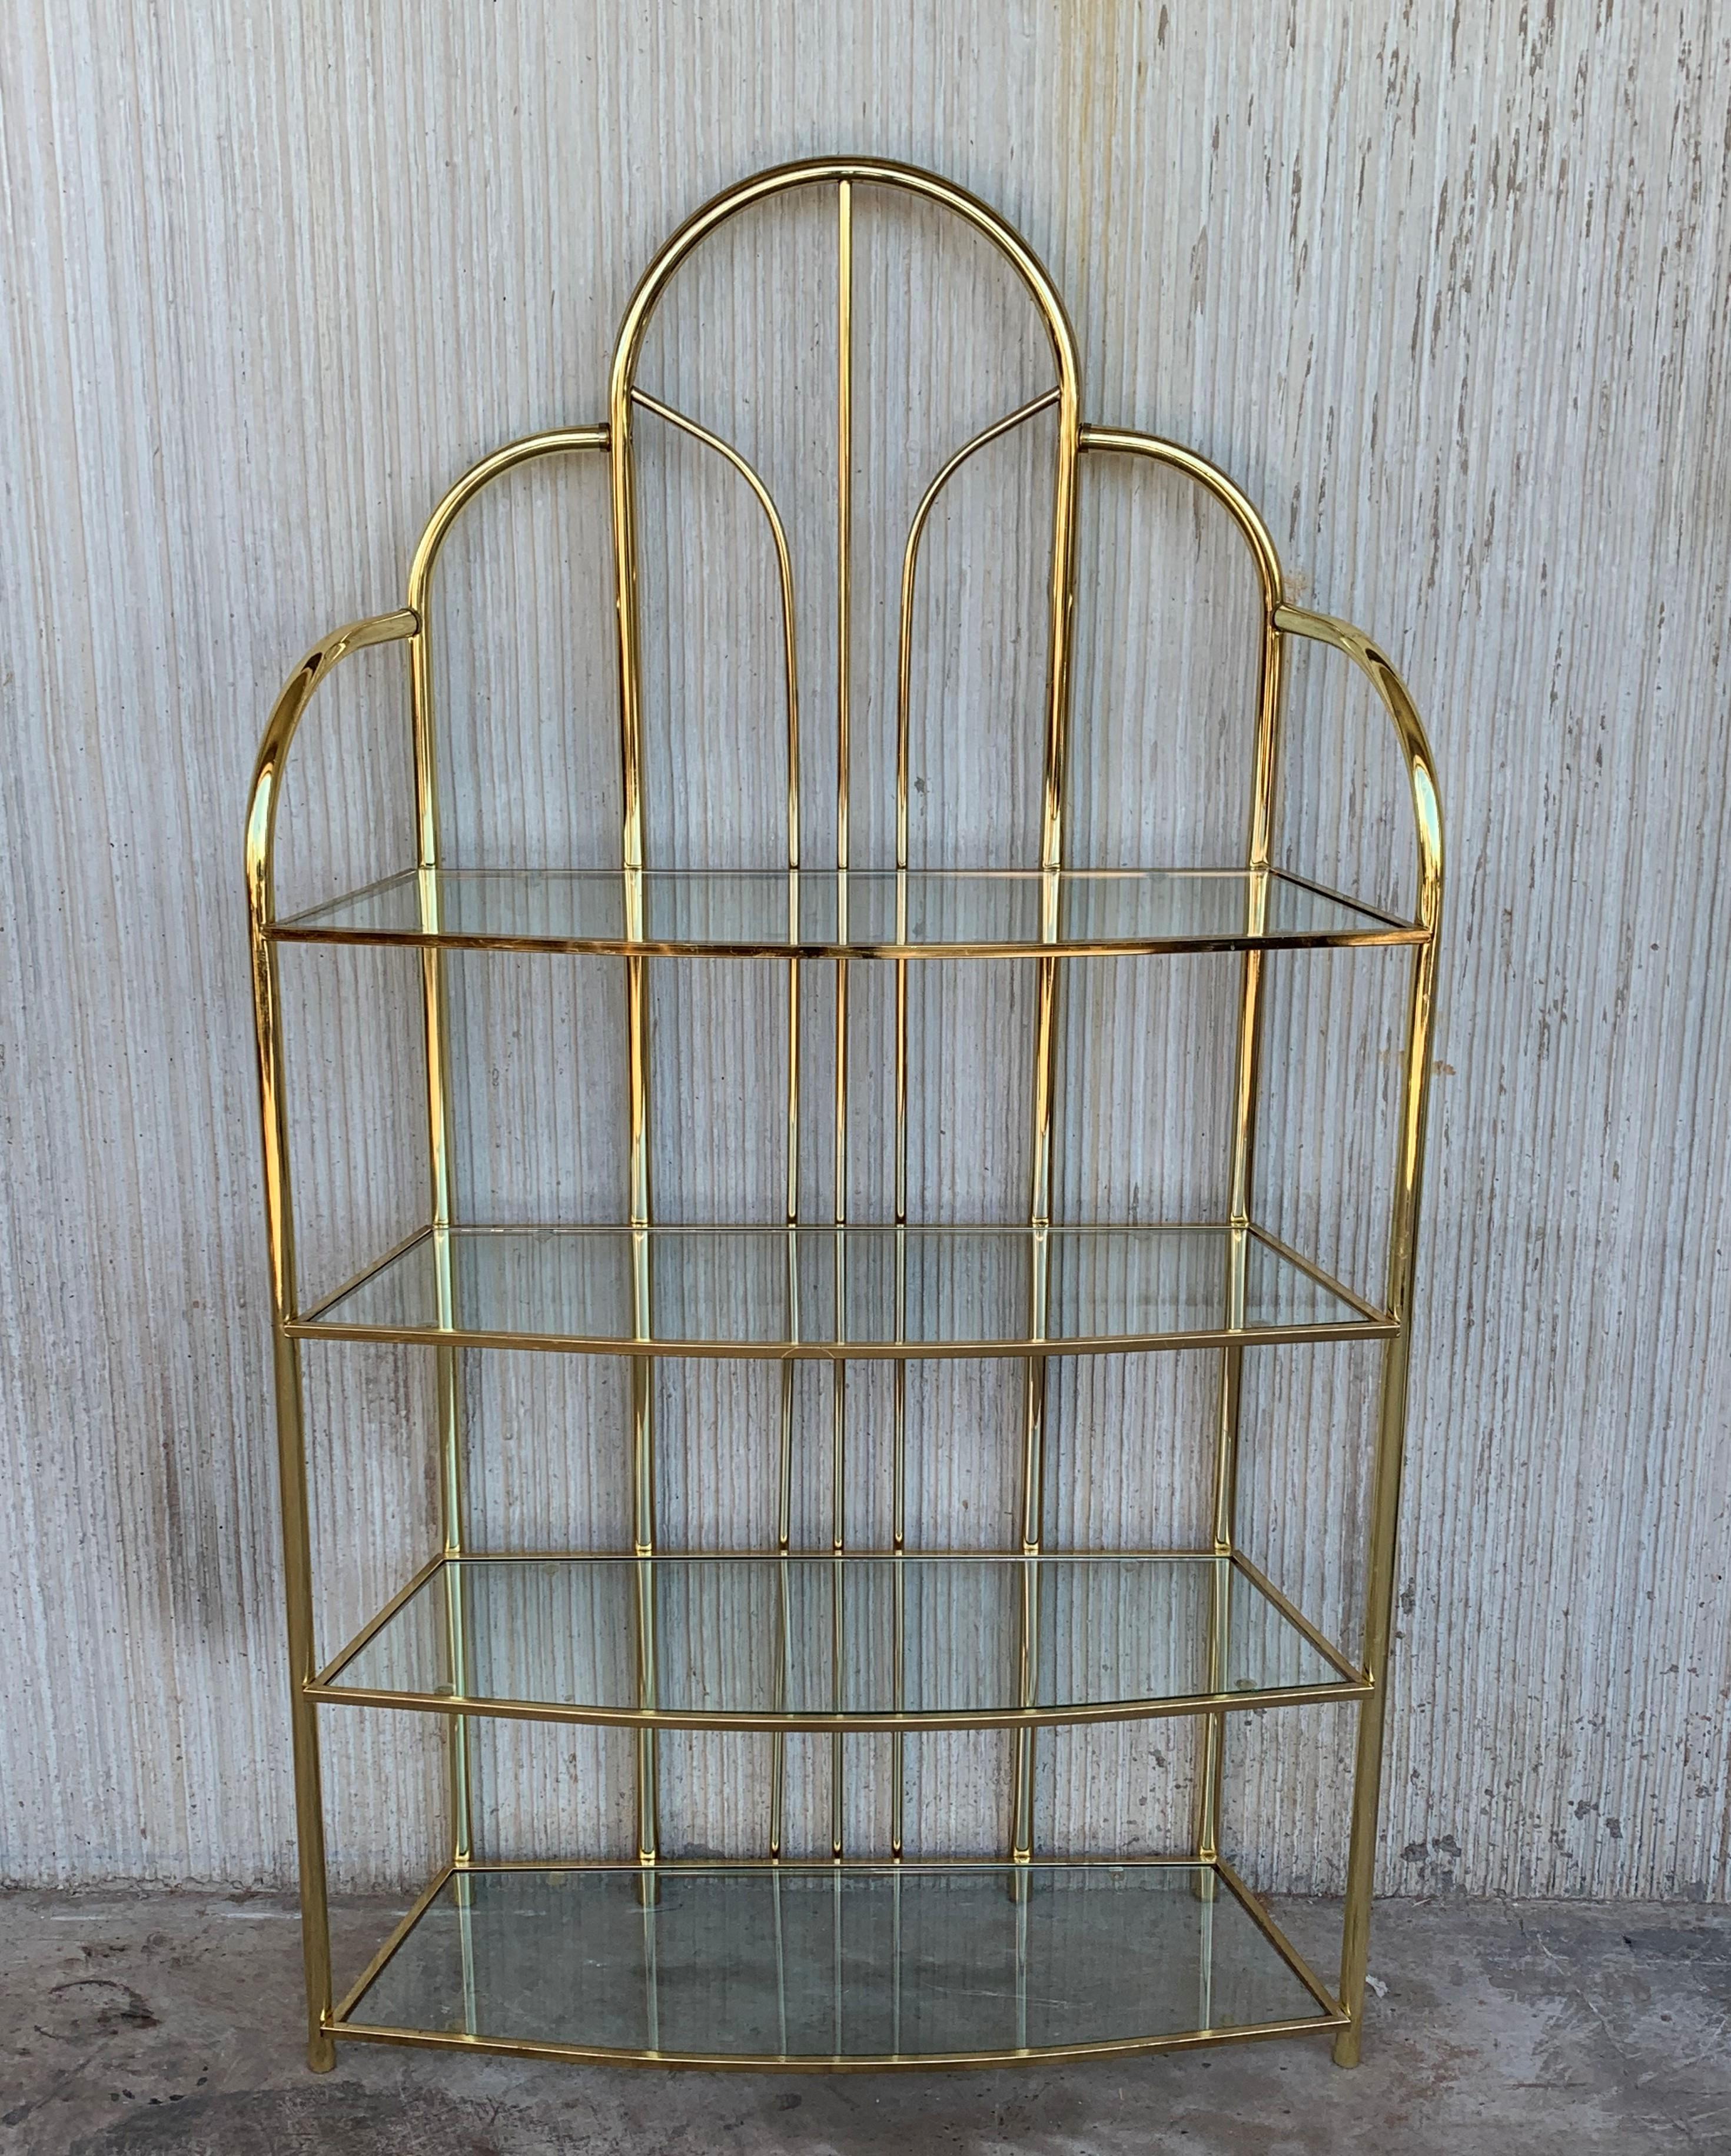 Vintage arched brass shelf shelves étagères. Chrome has been polished. Glasses are originals. In the style of Milo Baughman.

Height shelves measurements: 
46in
31.5in
16.52in
2.5in.